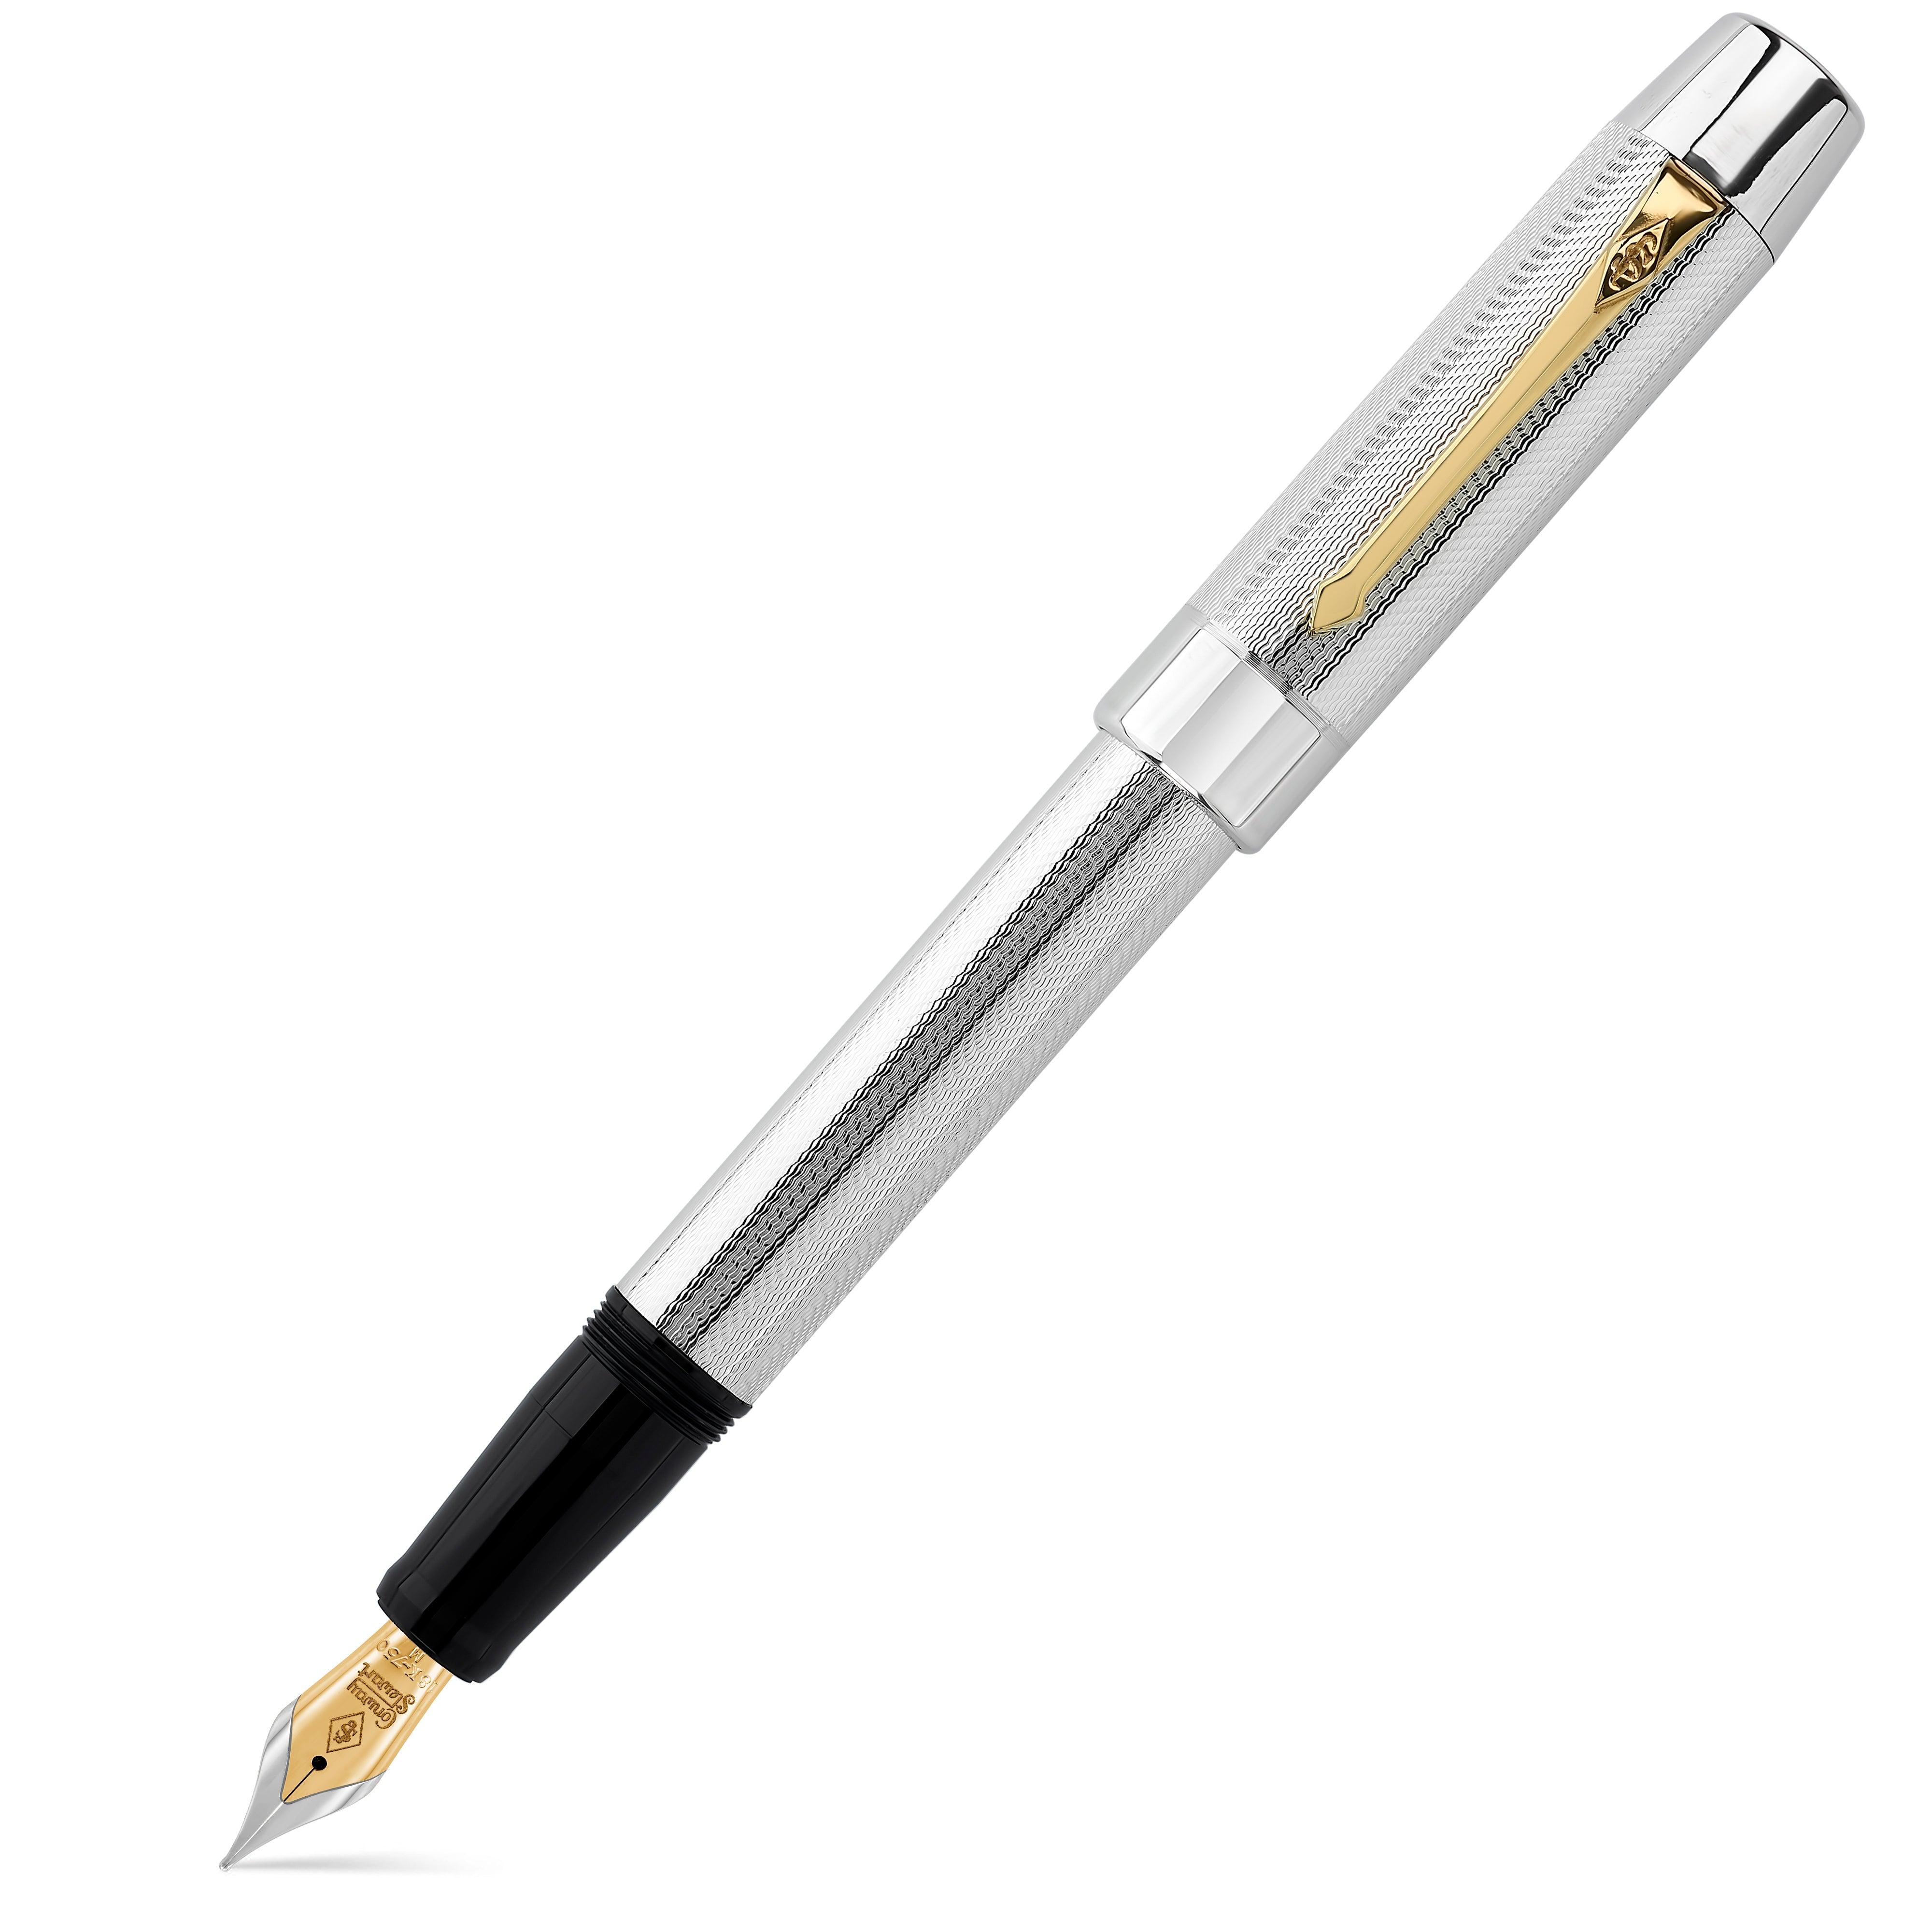 Five gold fountain pens you will love - The Pen Company Blog